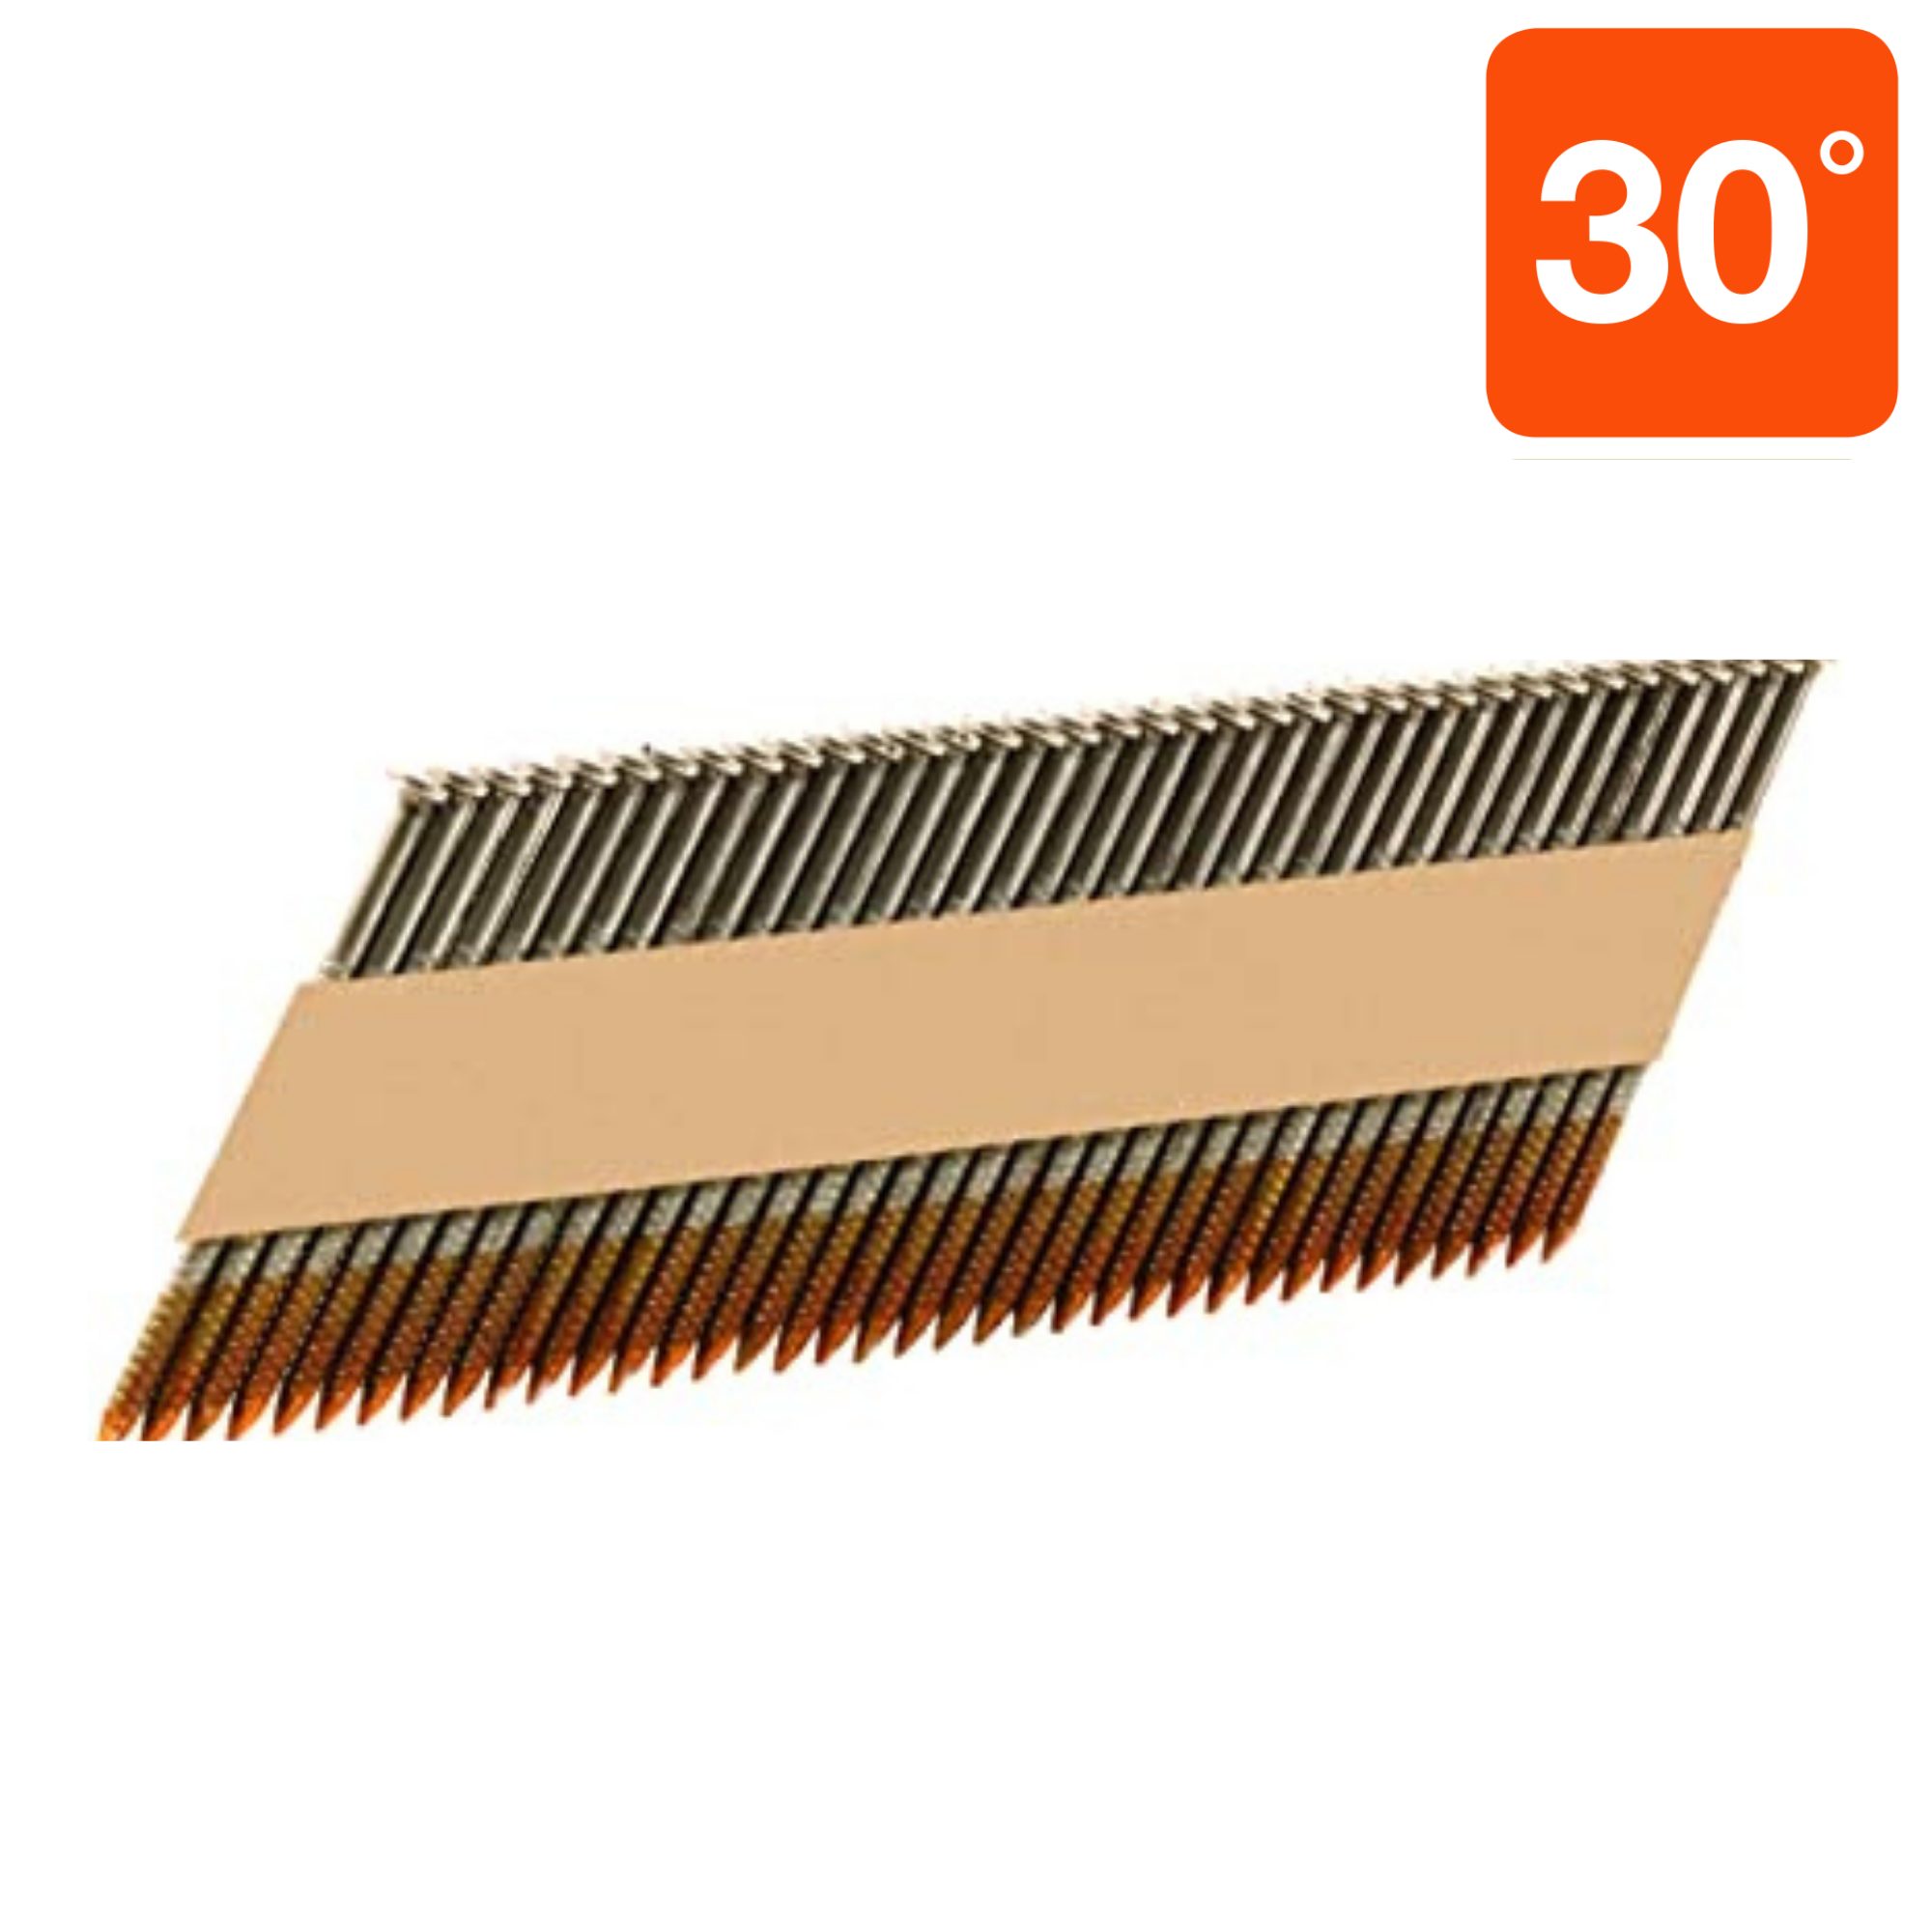 3-1/4" Clipped Head Paper Collated Basic Bright Framing Nails